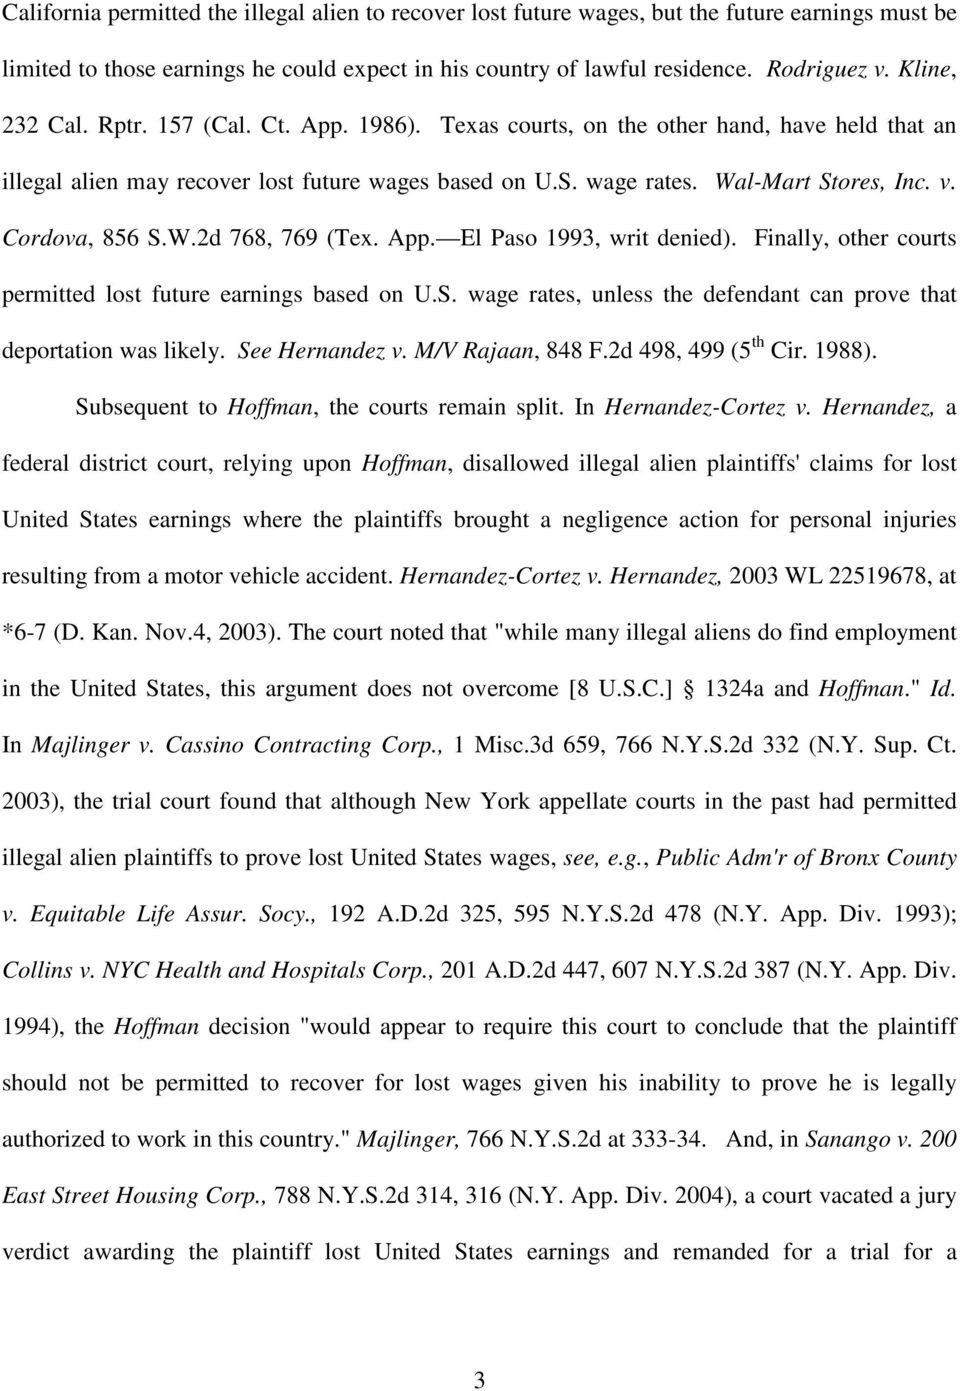 Cordova, 856 S.W.2d 768, 769 (Tex. App. El Paso 1993, writ denied). Finally, other courts permitted lost future earnings based on U.S. wage rates, unless the defendant can prove that deportation was likely.